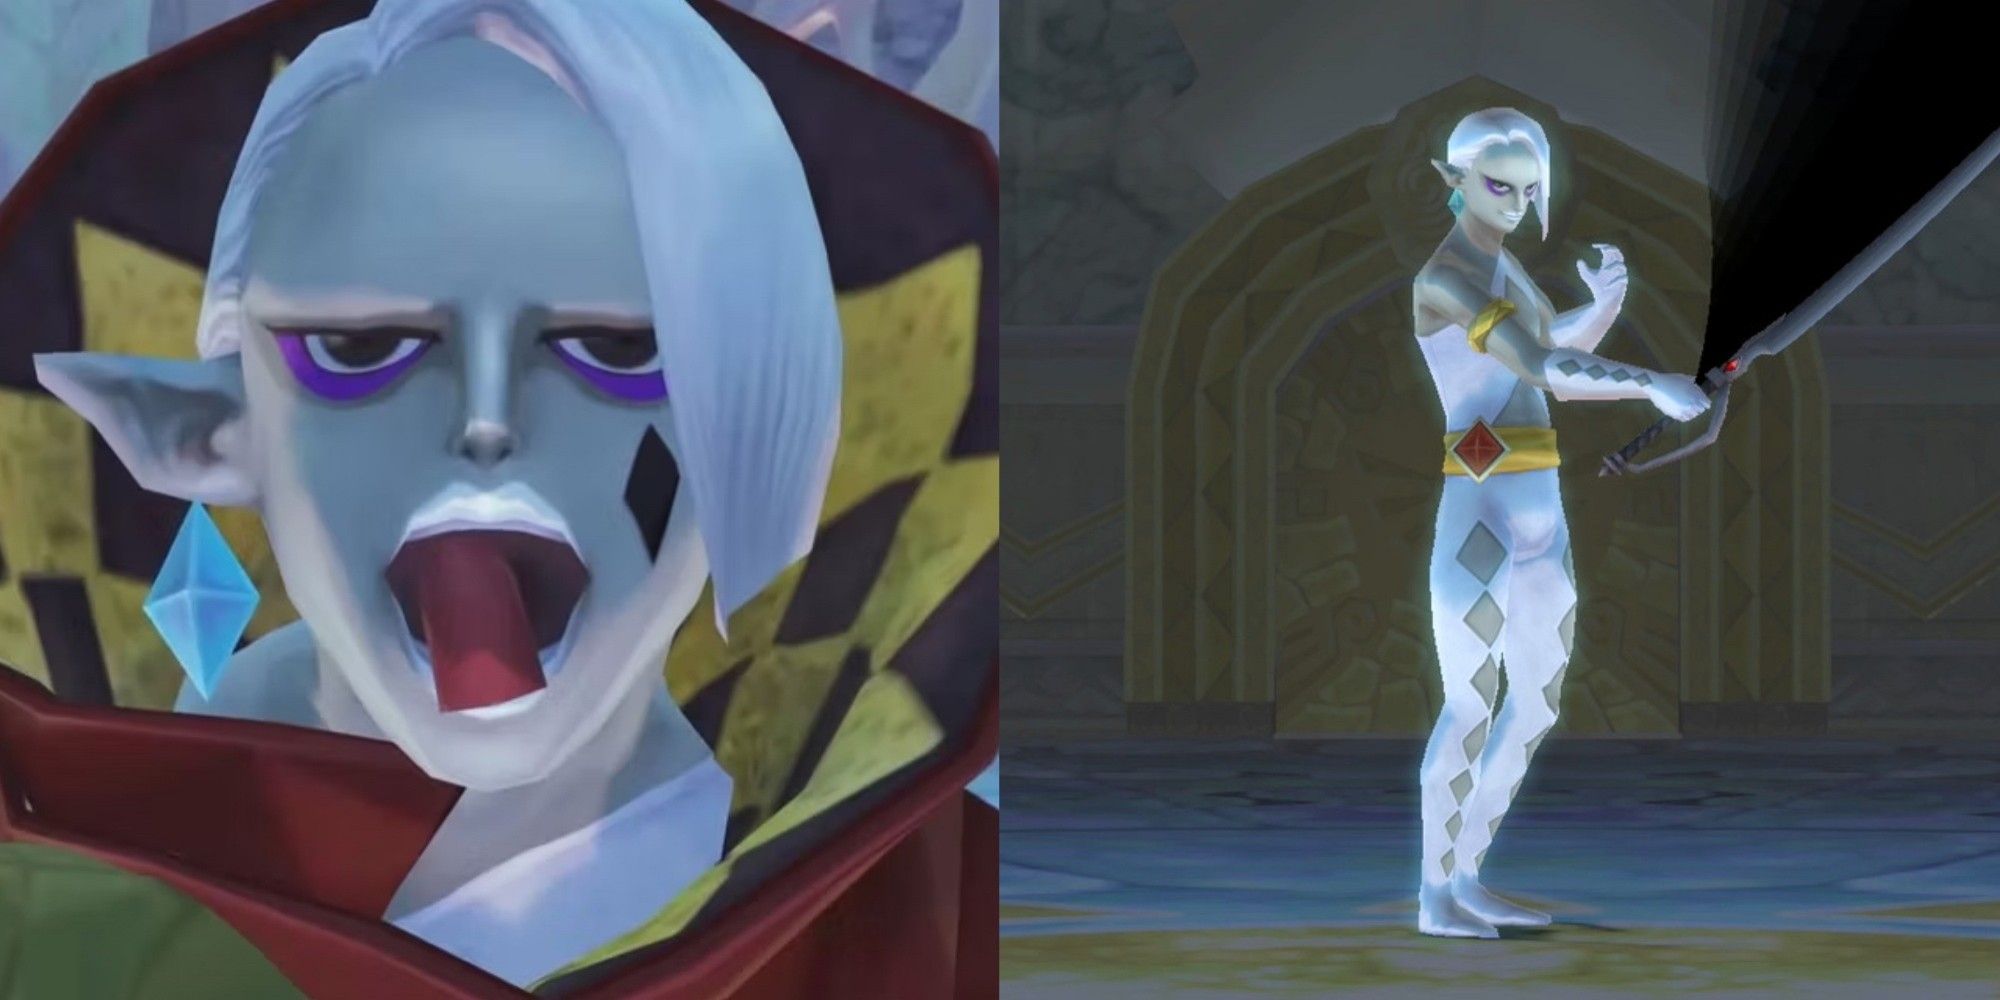 ghirahim in battle and sticking his tongue out skyward sword legend of zelda villains